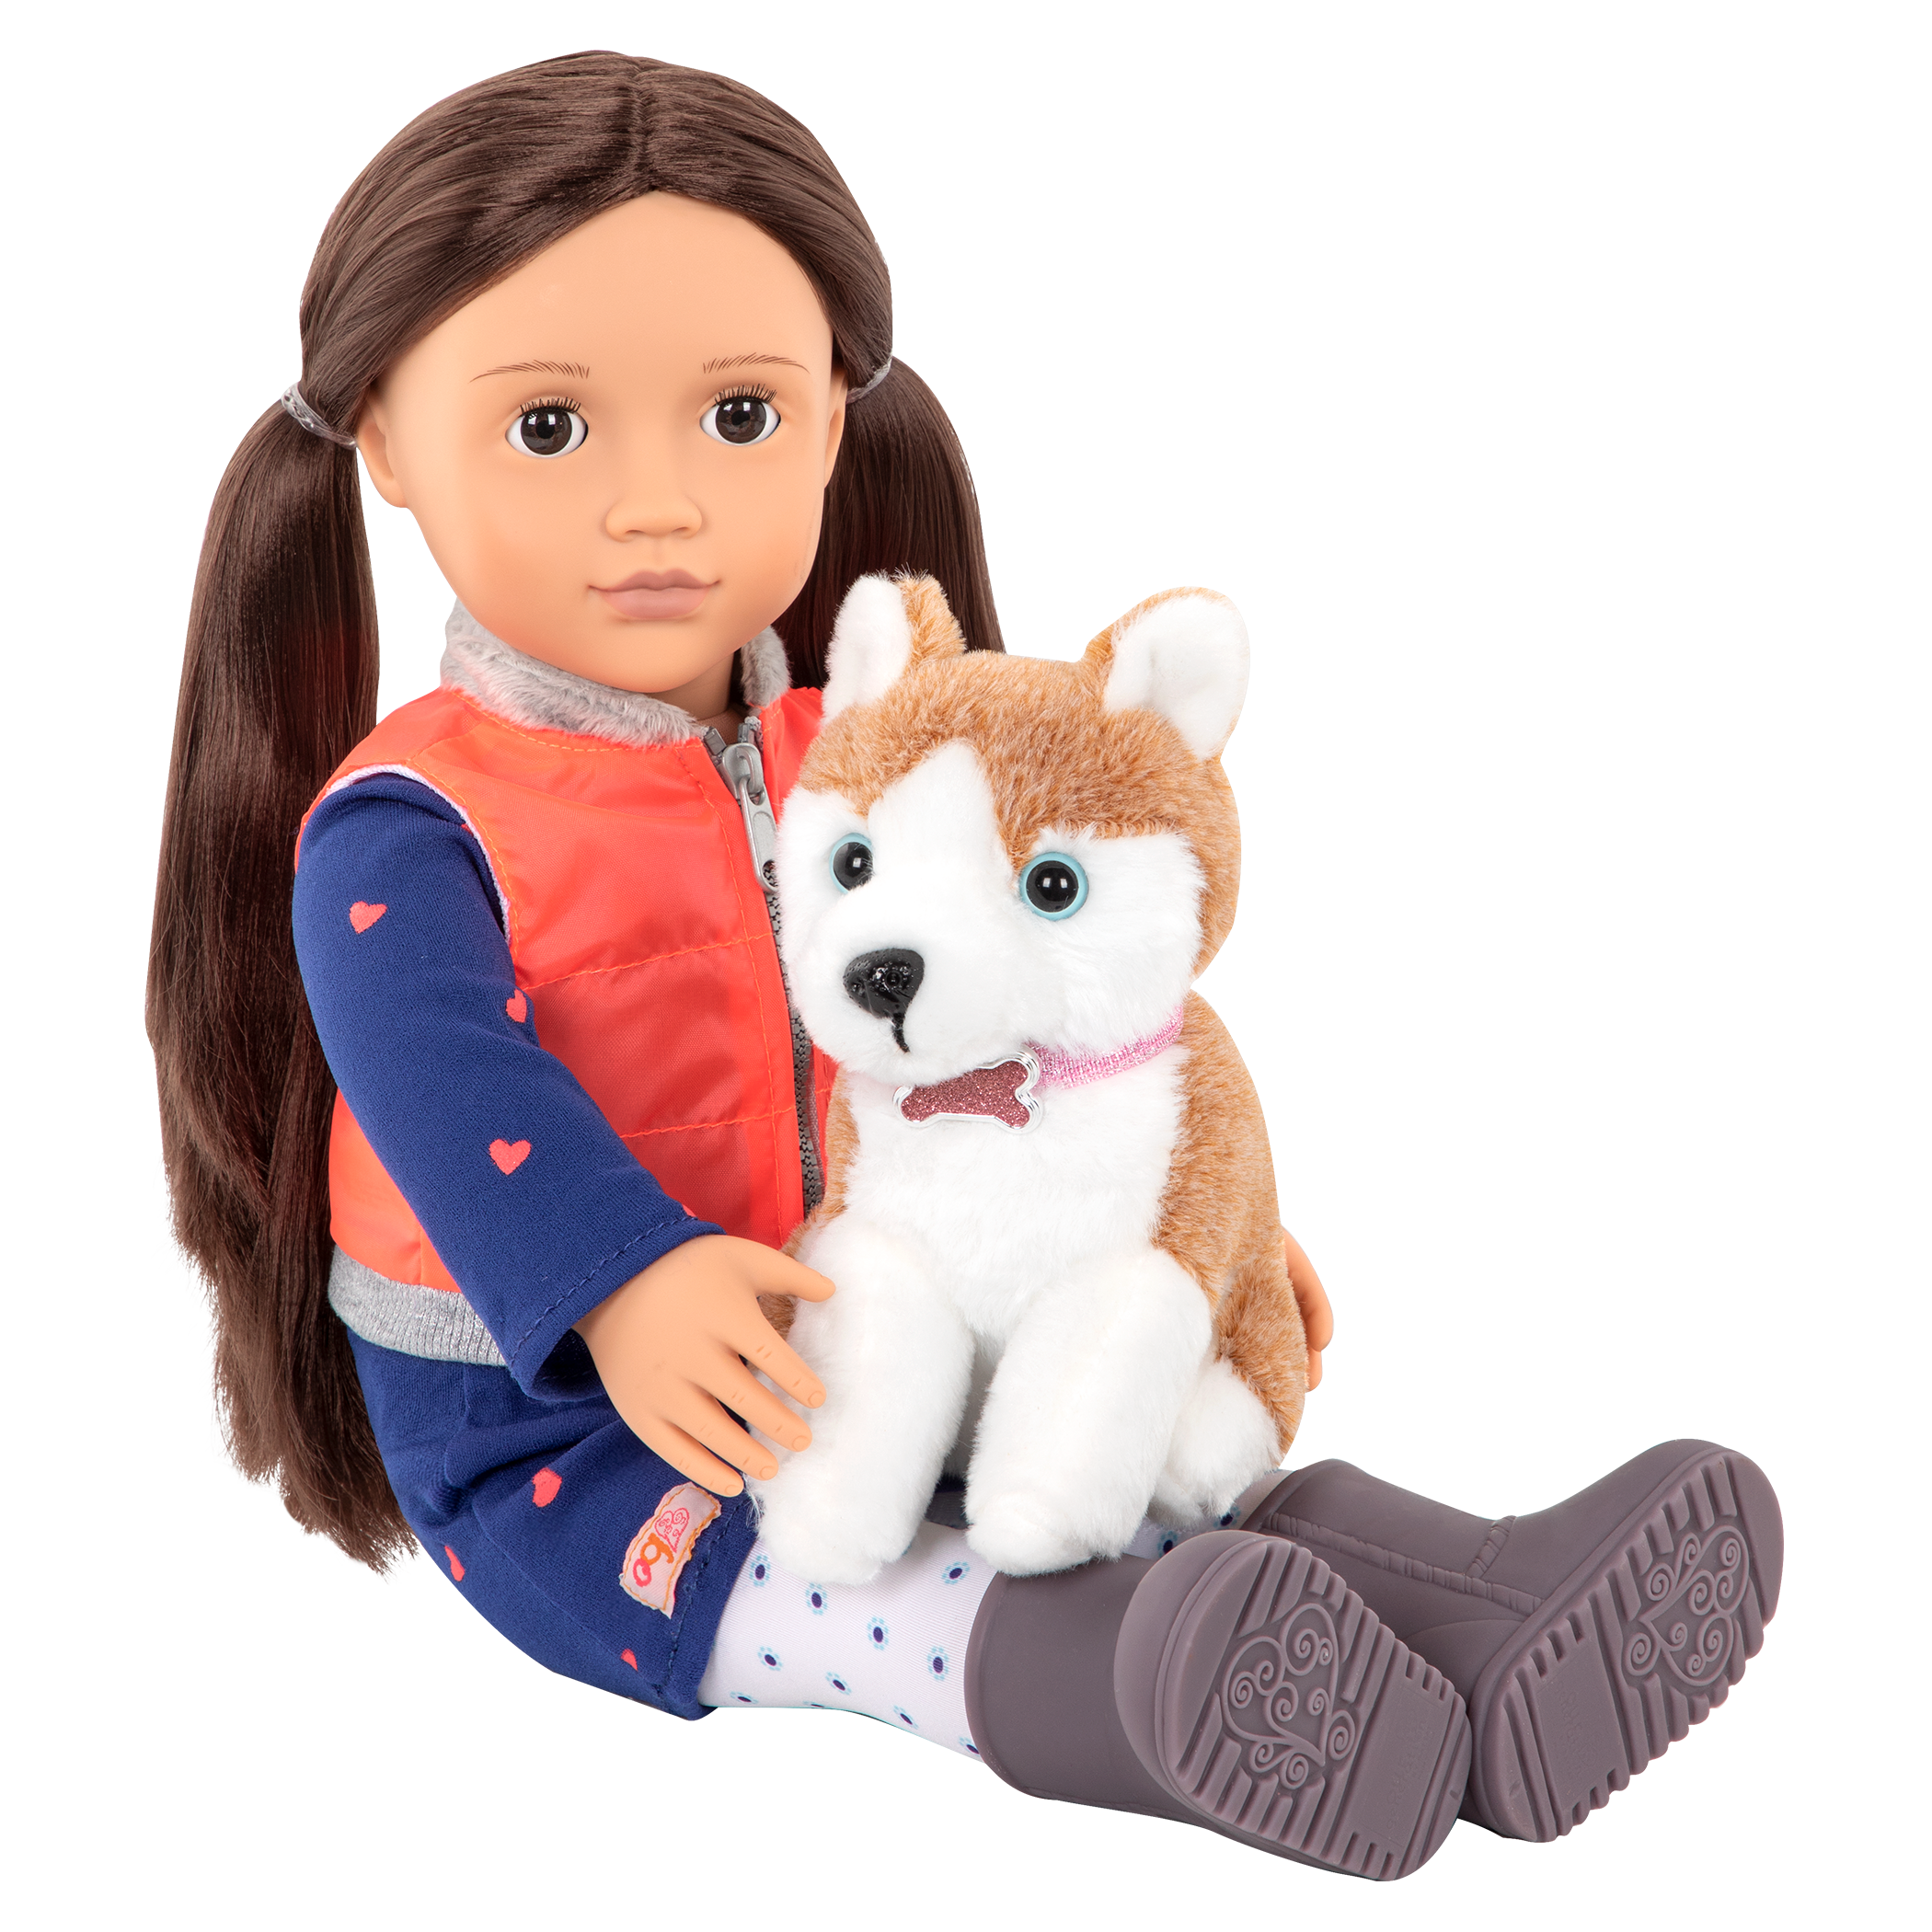 Leslie sitting with Husky in her lap